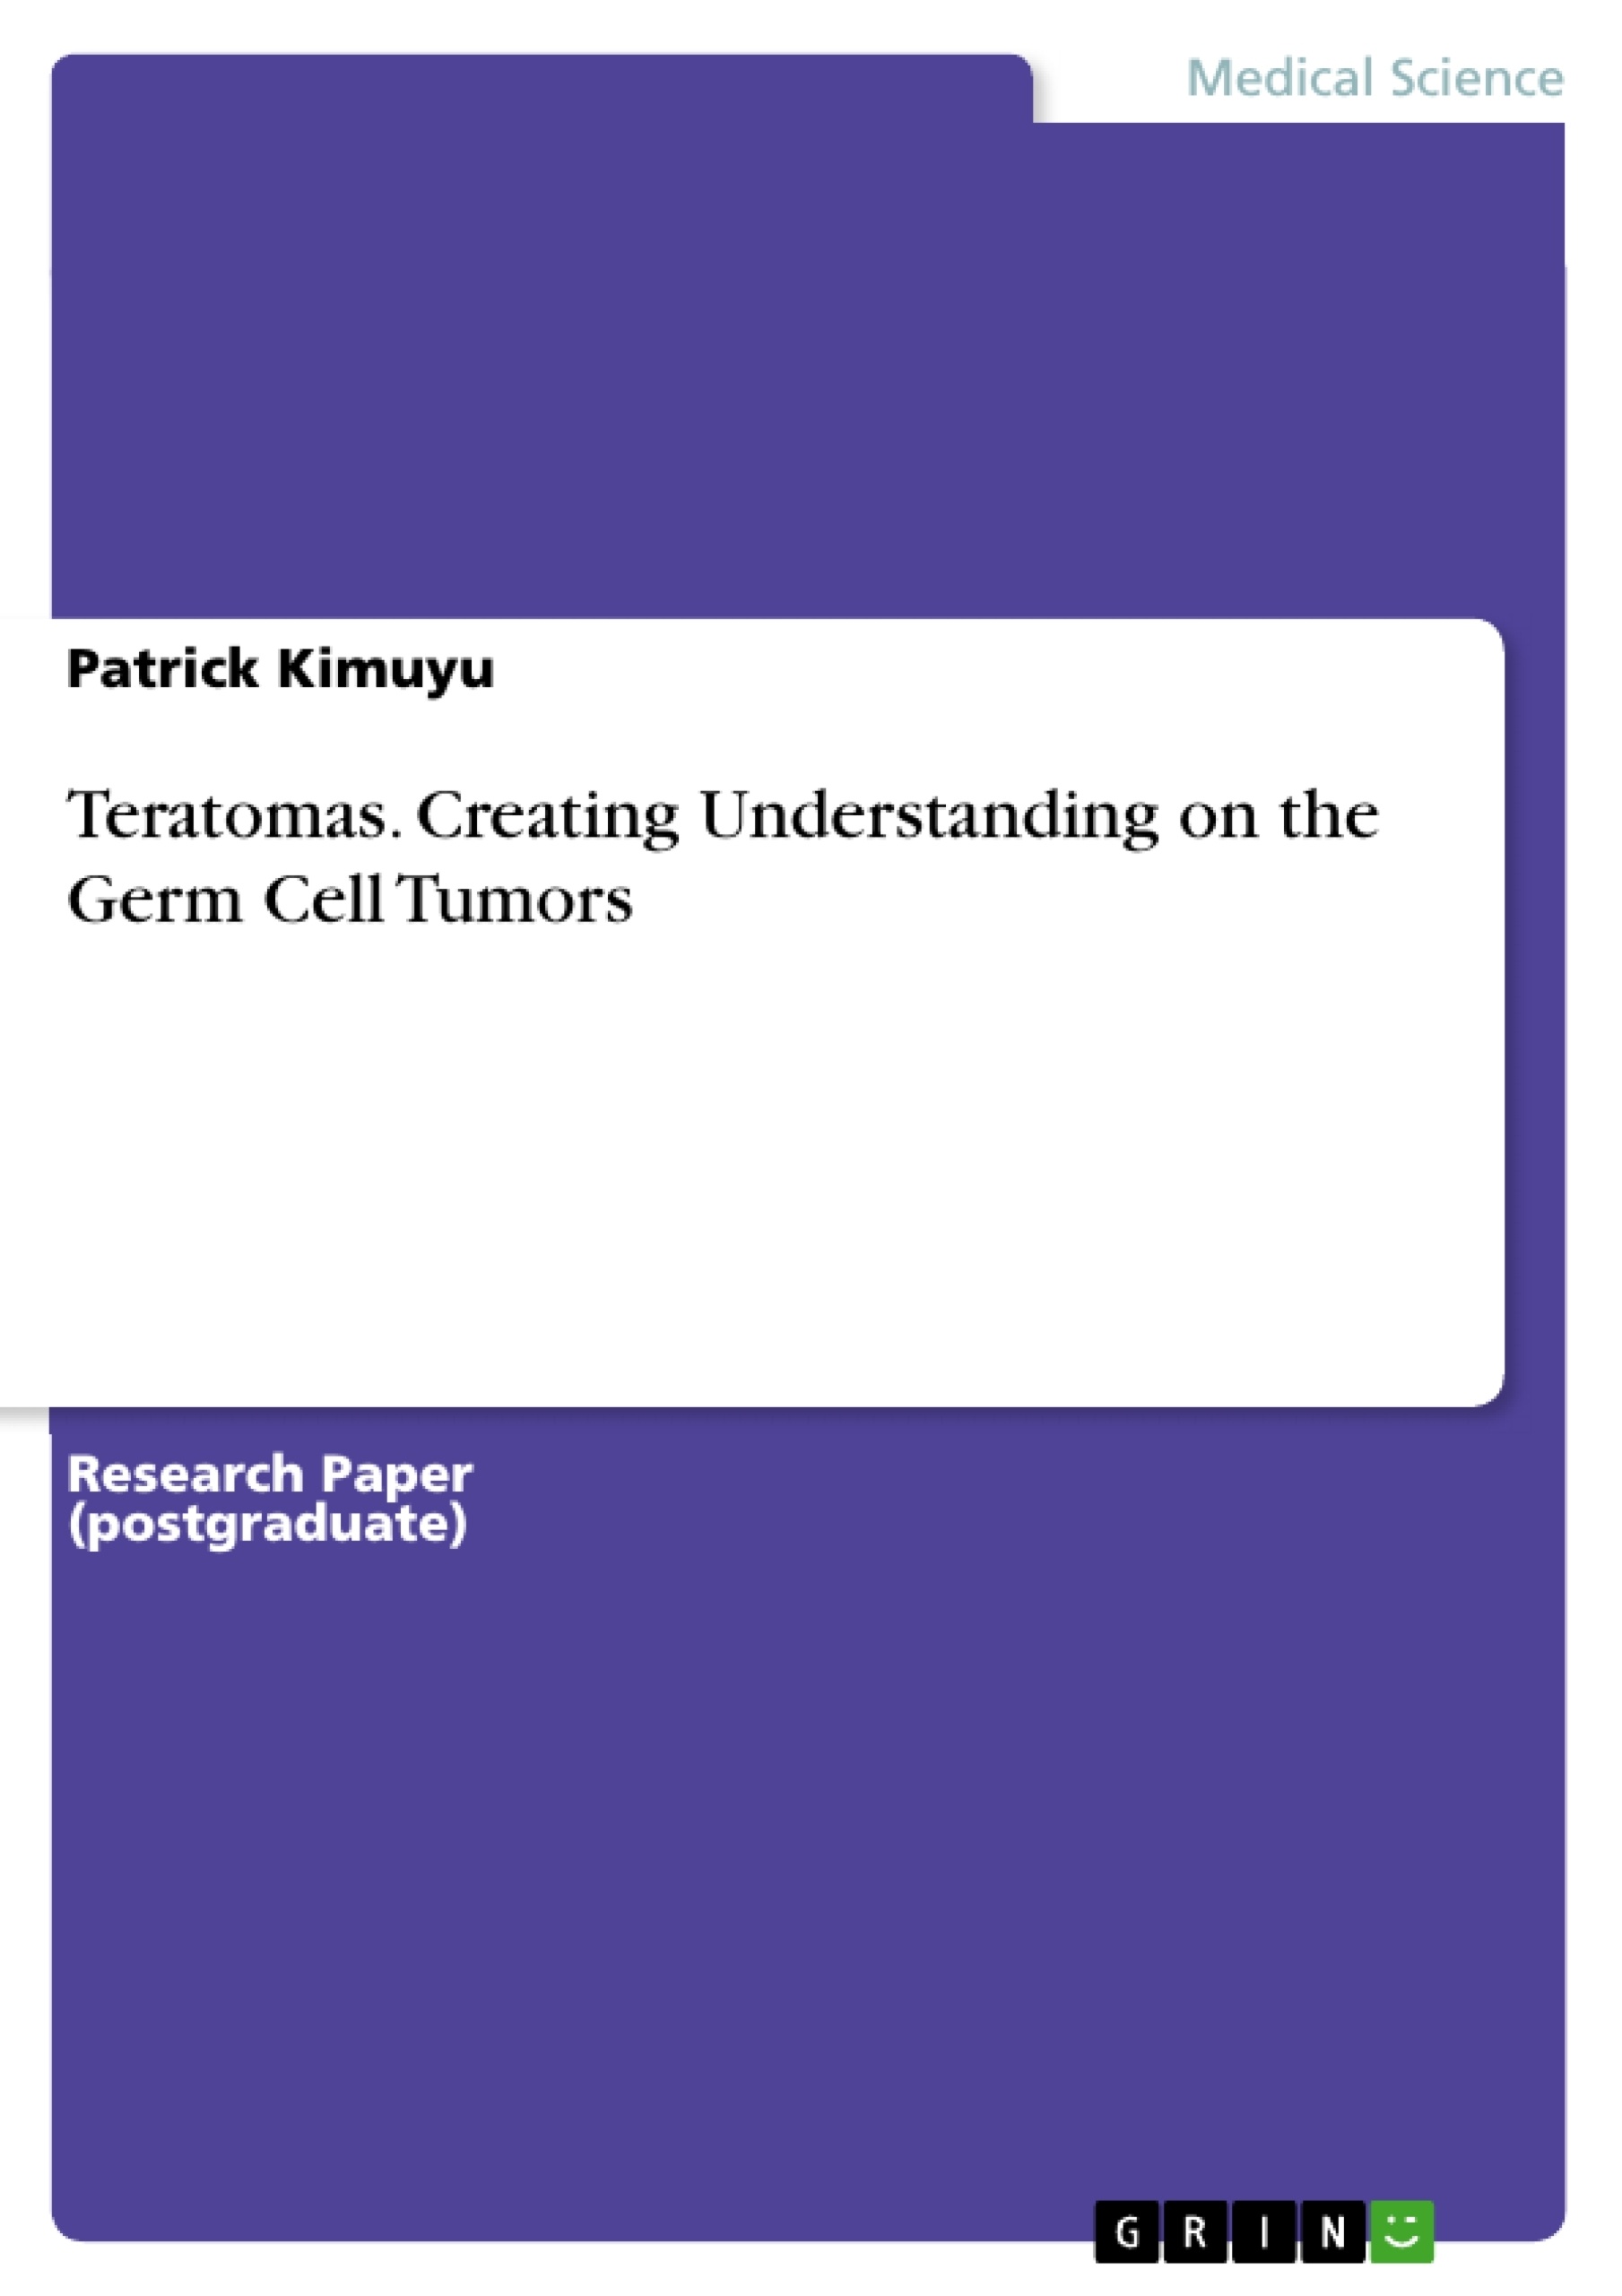 Title: Teratomas. Creating Understanding on the Germ Cell Tumors